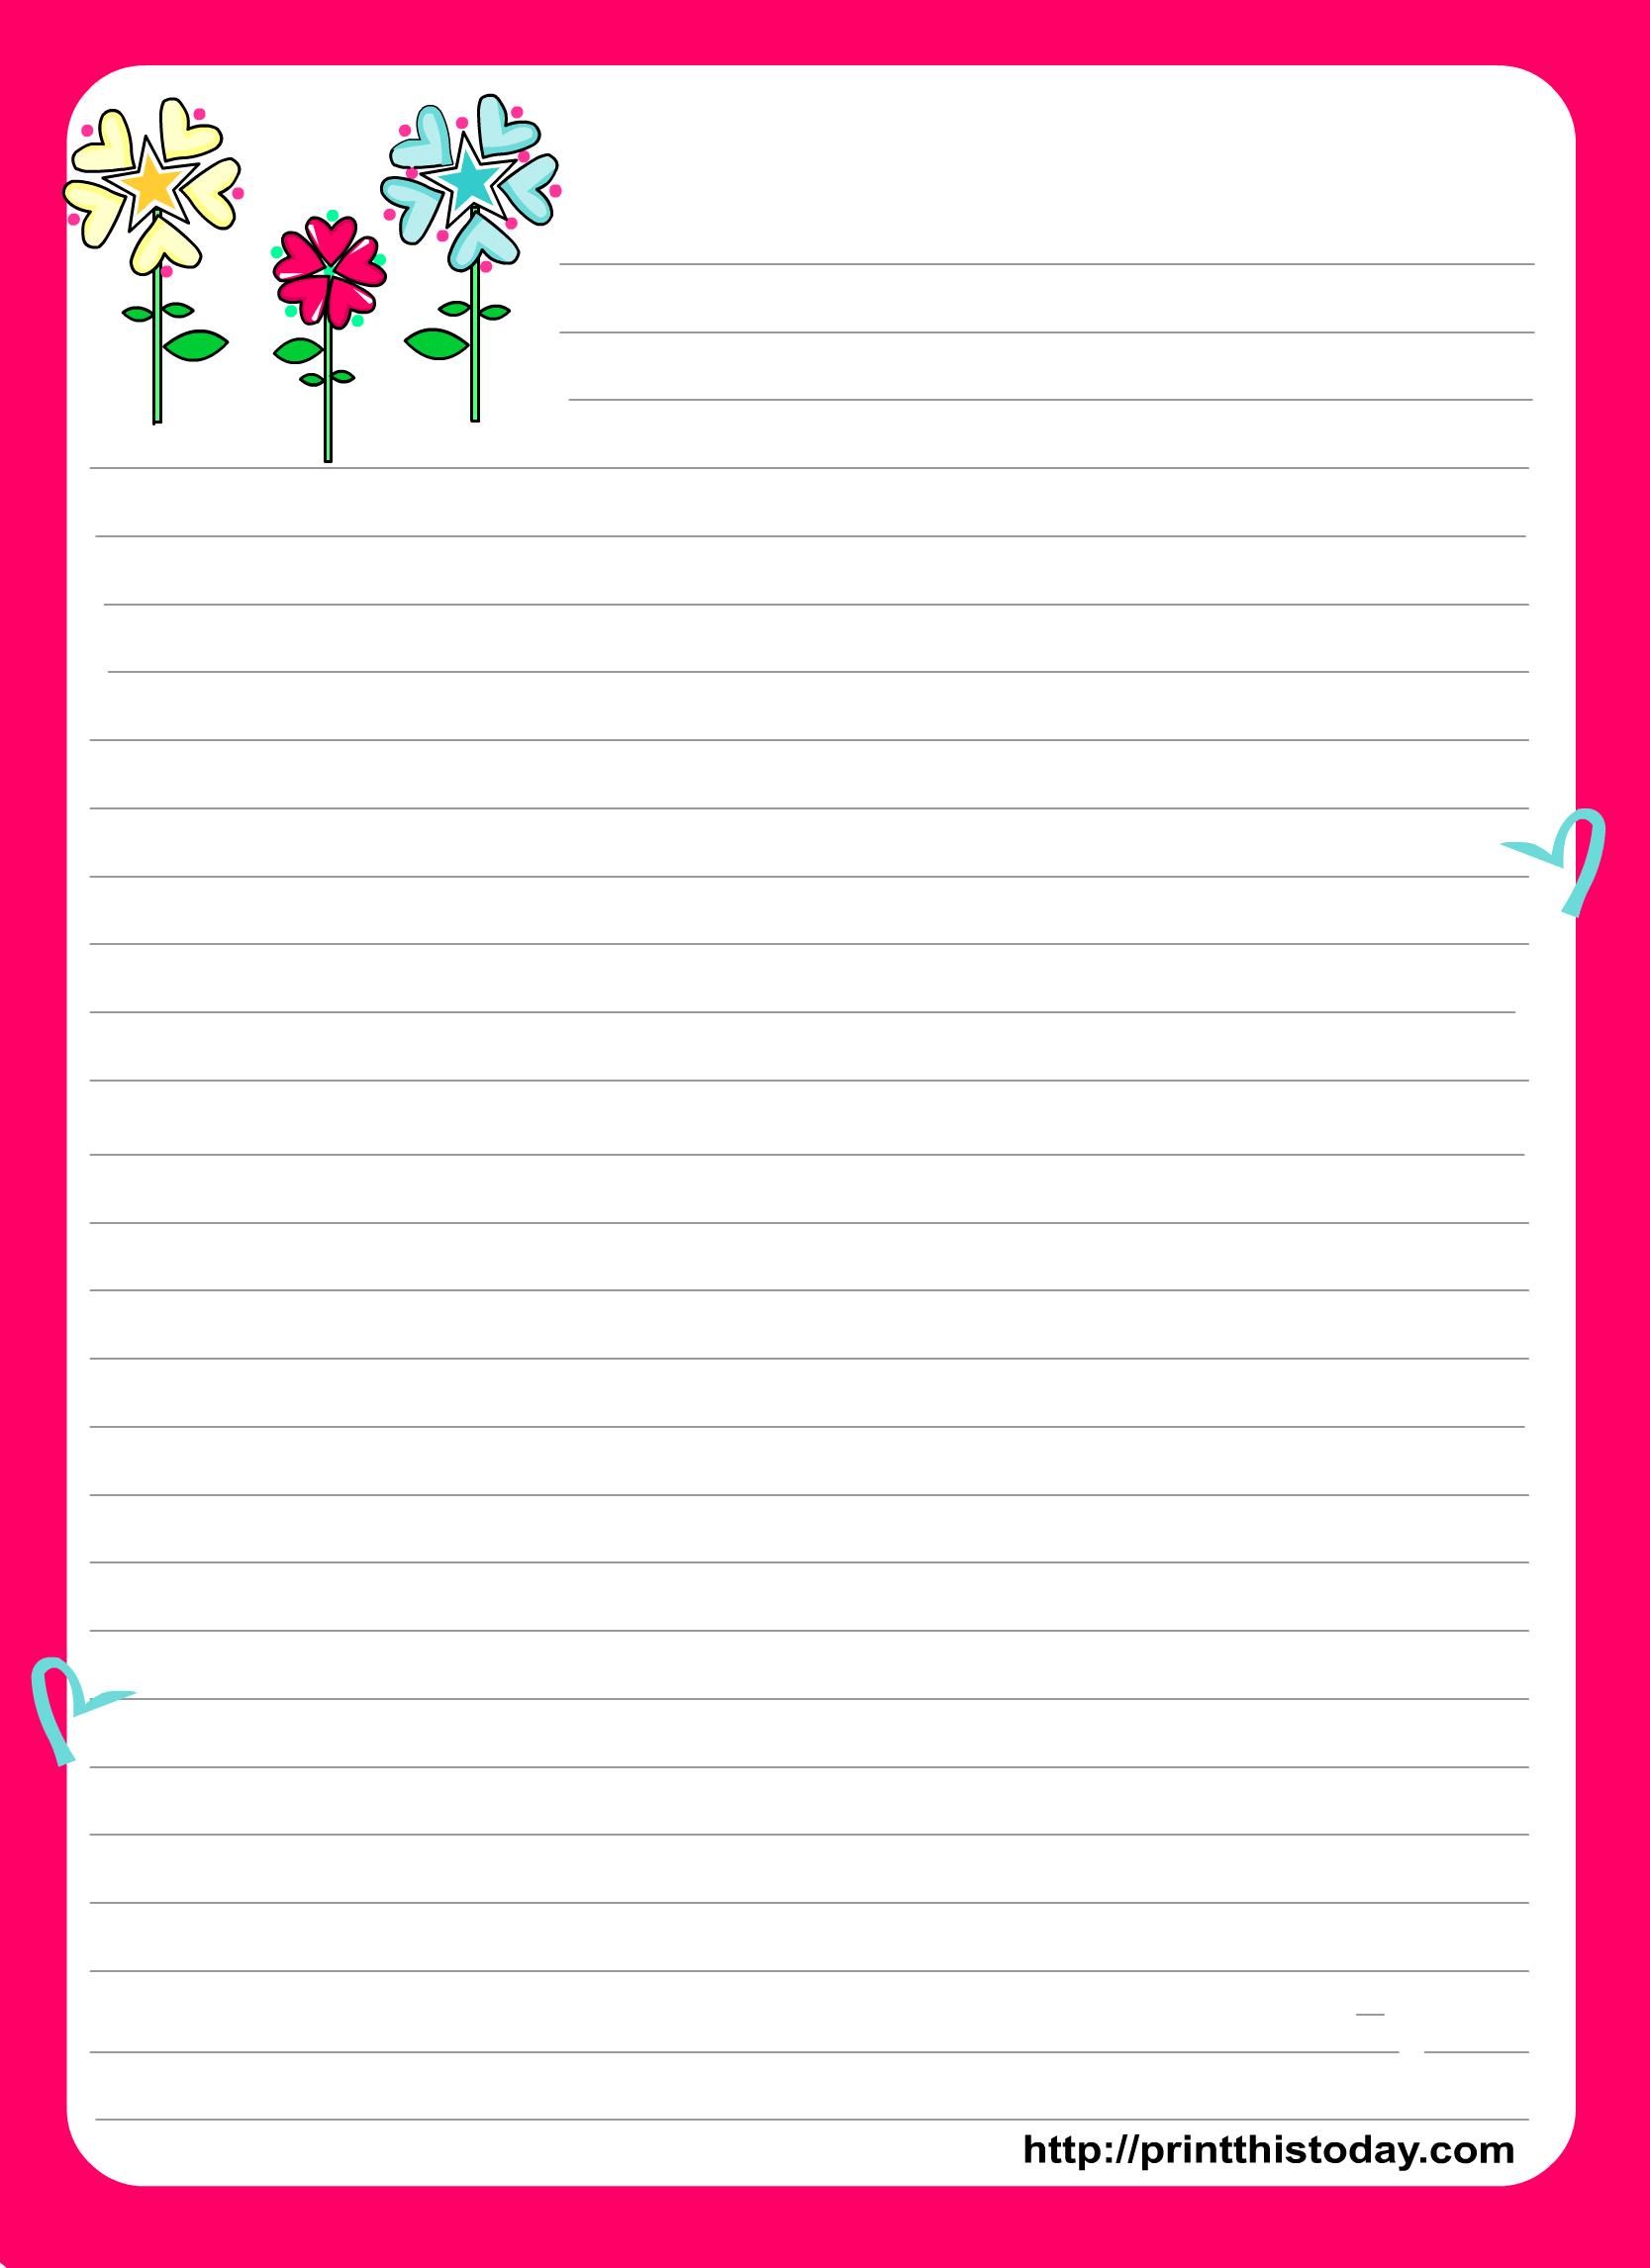 Love Letter Pad Stationery | Stationery | Free Printable Stationery - Free Printable Love Letter Paper